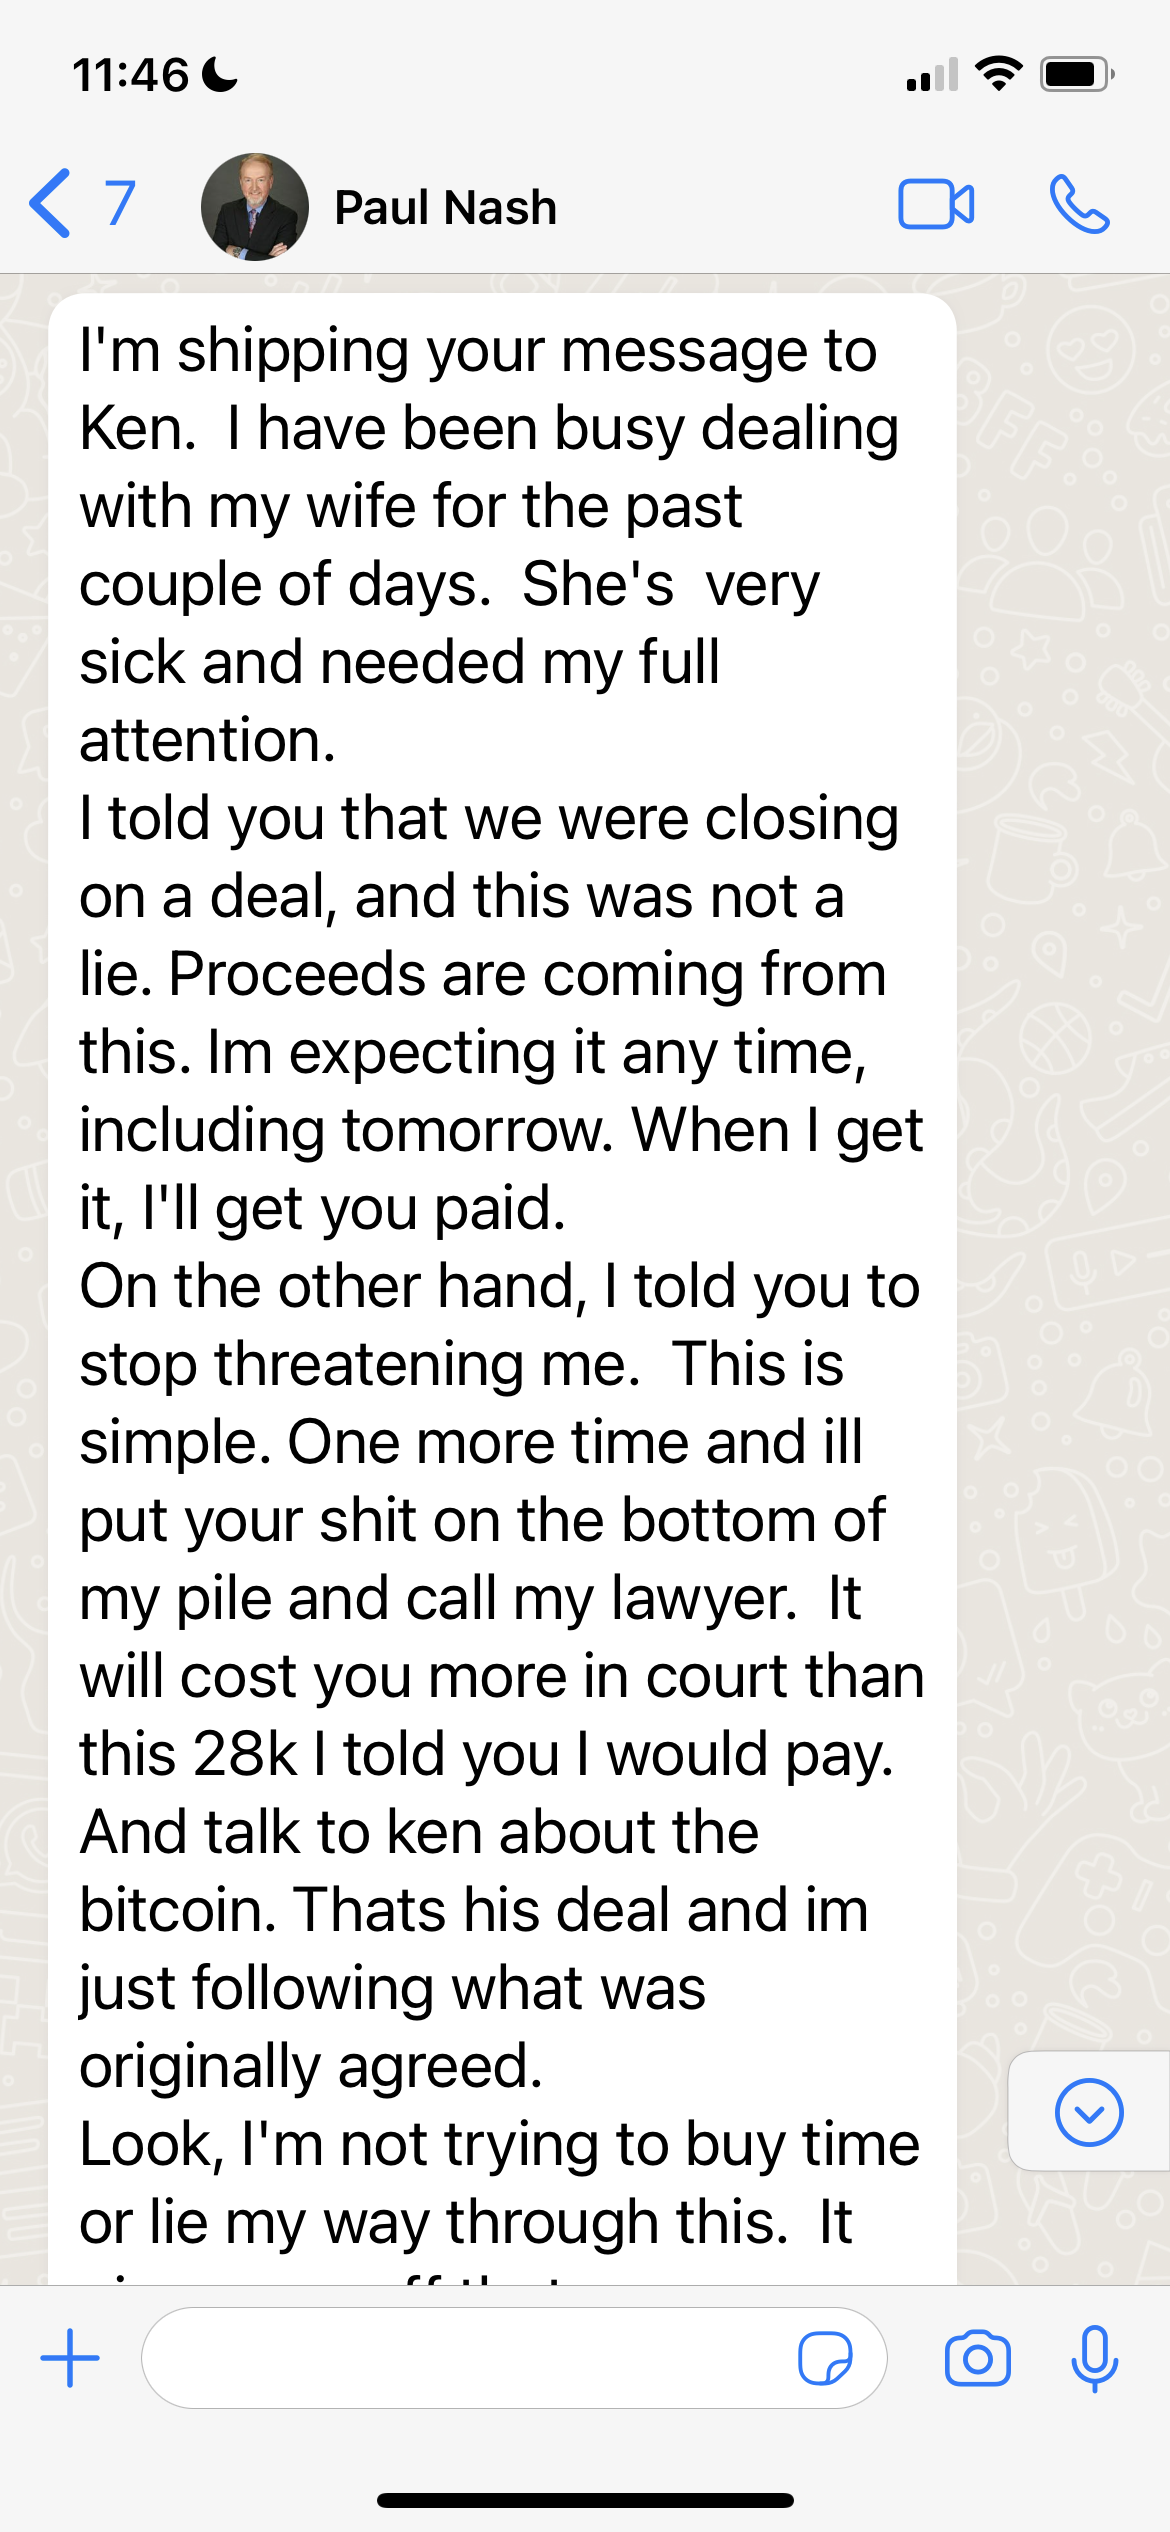 last message I received from him threatening suit 